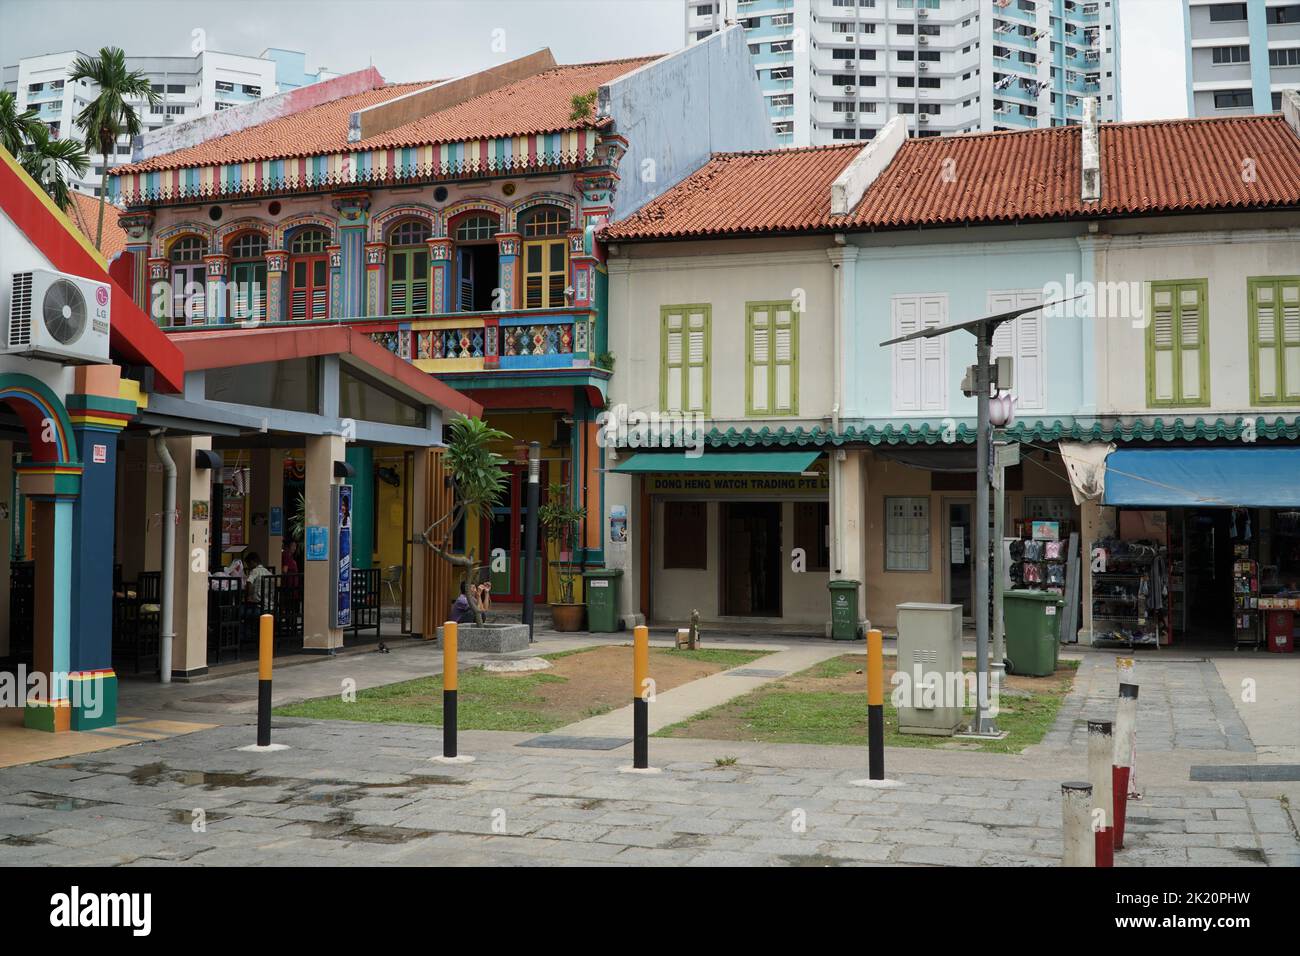 A traditional house facades from the colonial era in Little India, Singapore Stock Photo